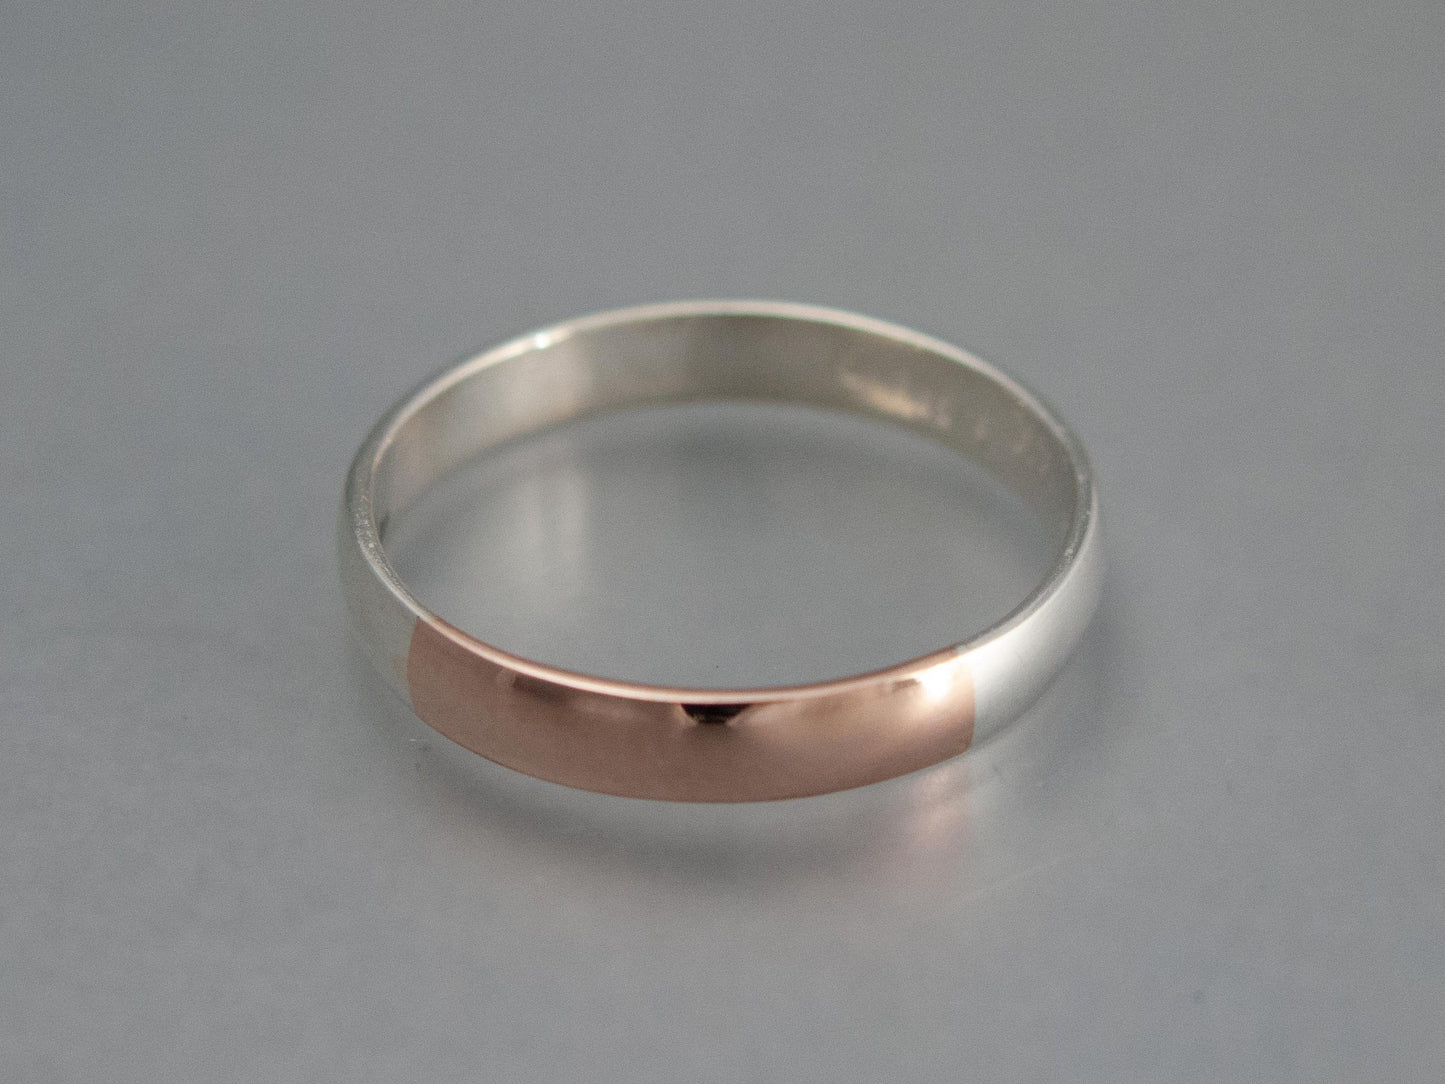 Wide Mixed Metals Wedding Band | Low Domed Opposites Attract Band in Sterling Silver with 14k Rose or Yellow Gold